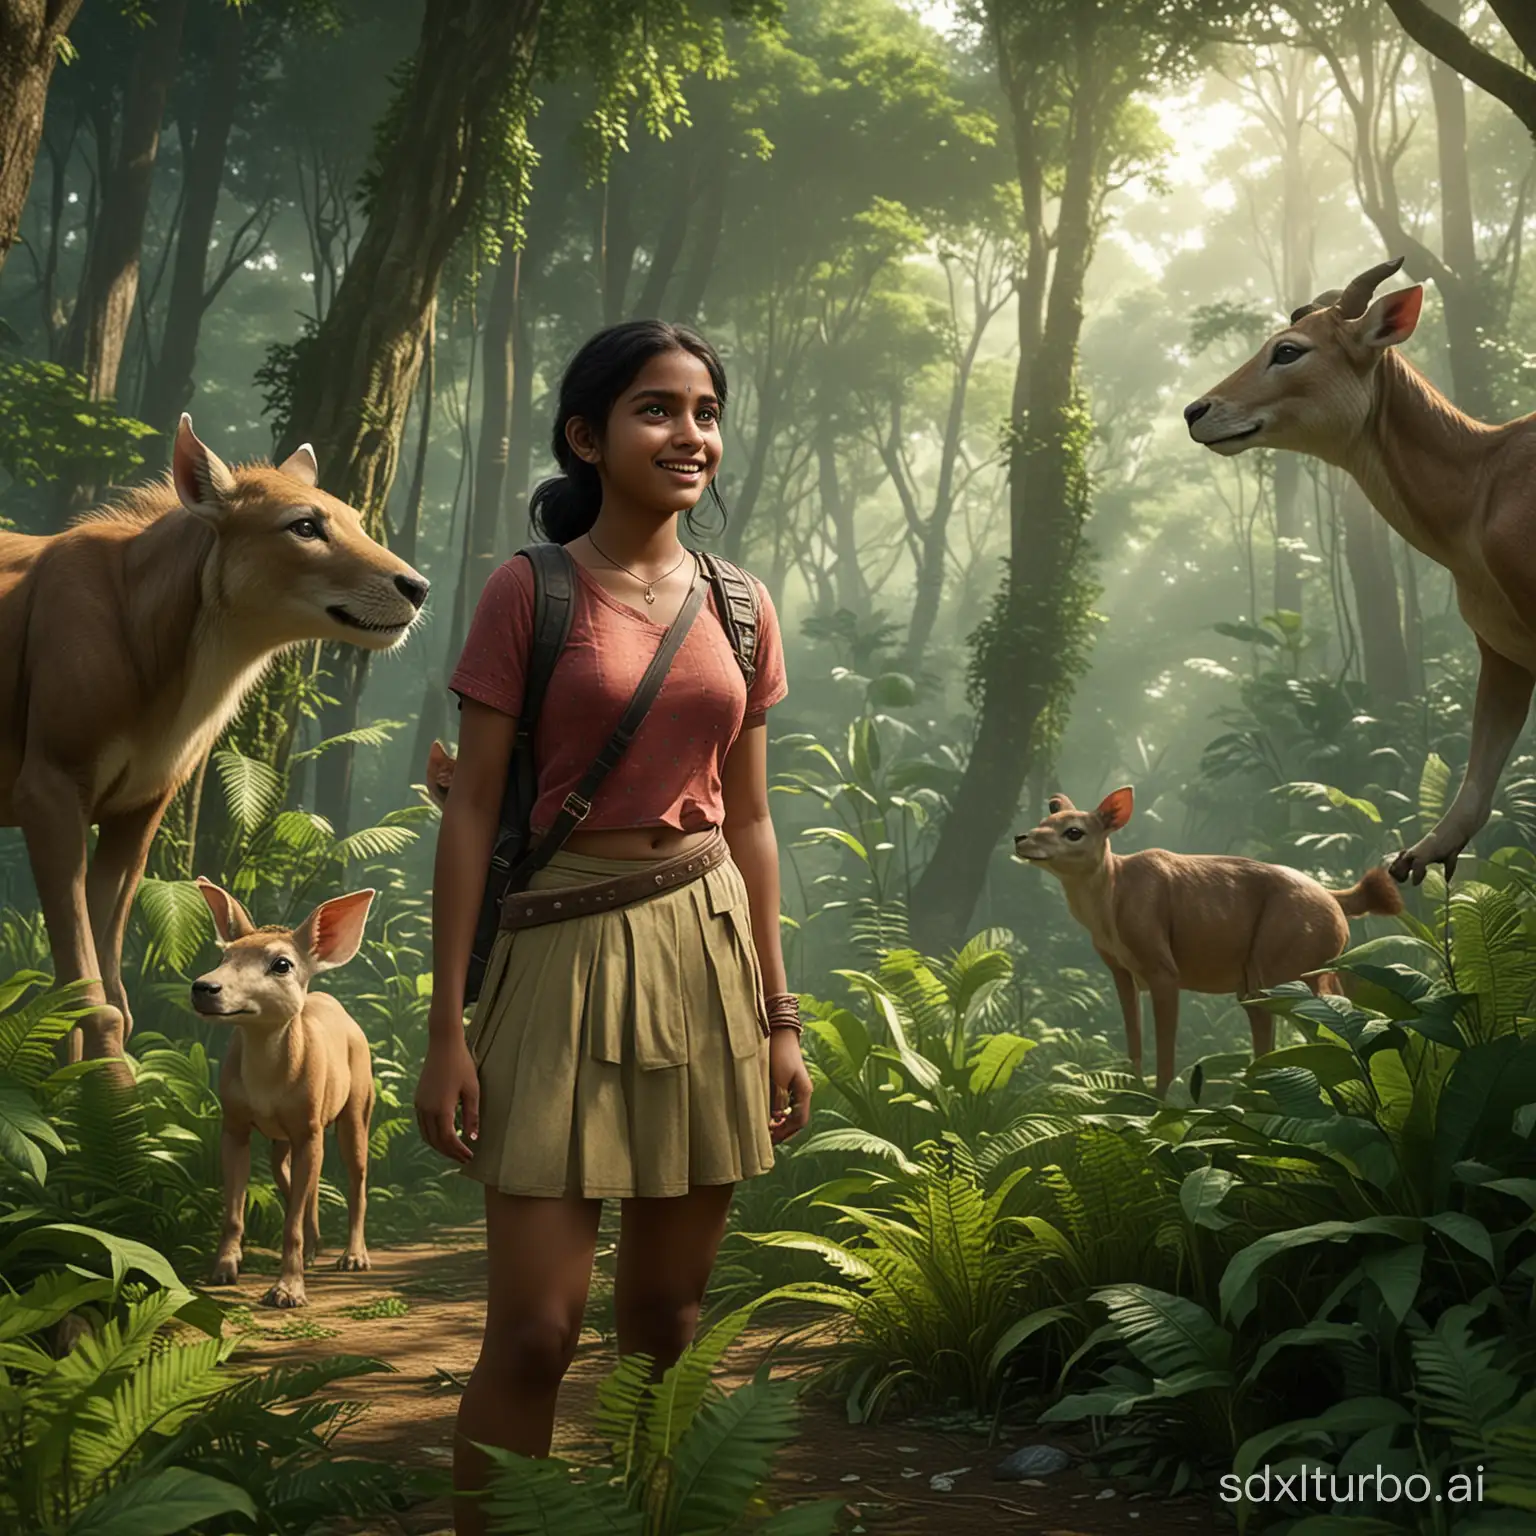 In the dense forest, a teen South Indian girl named Lily and her animal friends venture, encountering magical creatures and breathtaking sights. Laughter and joy fill the scene as they explore together, creating unforgettable memories amidst the lush greenery of the forest. Unreal Engine, hyper real --q 2 --v 5.2 --ar 16:9